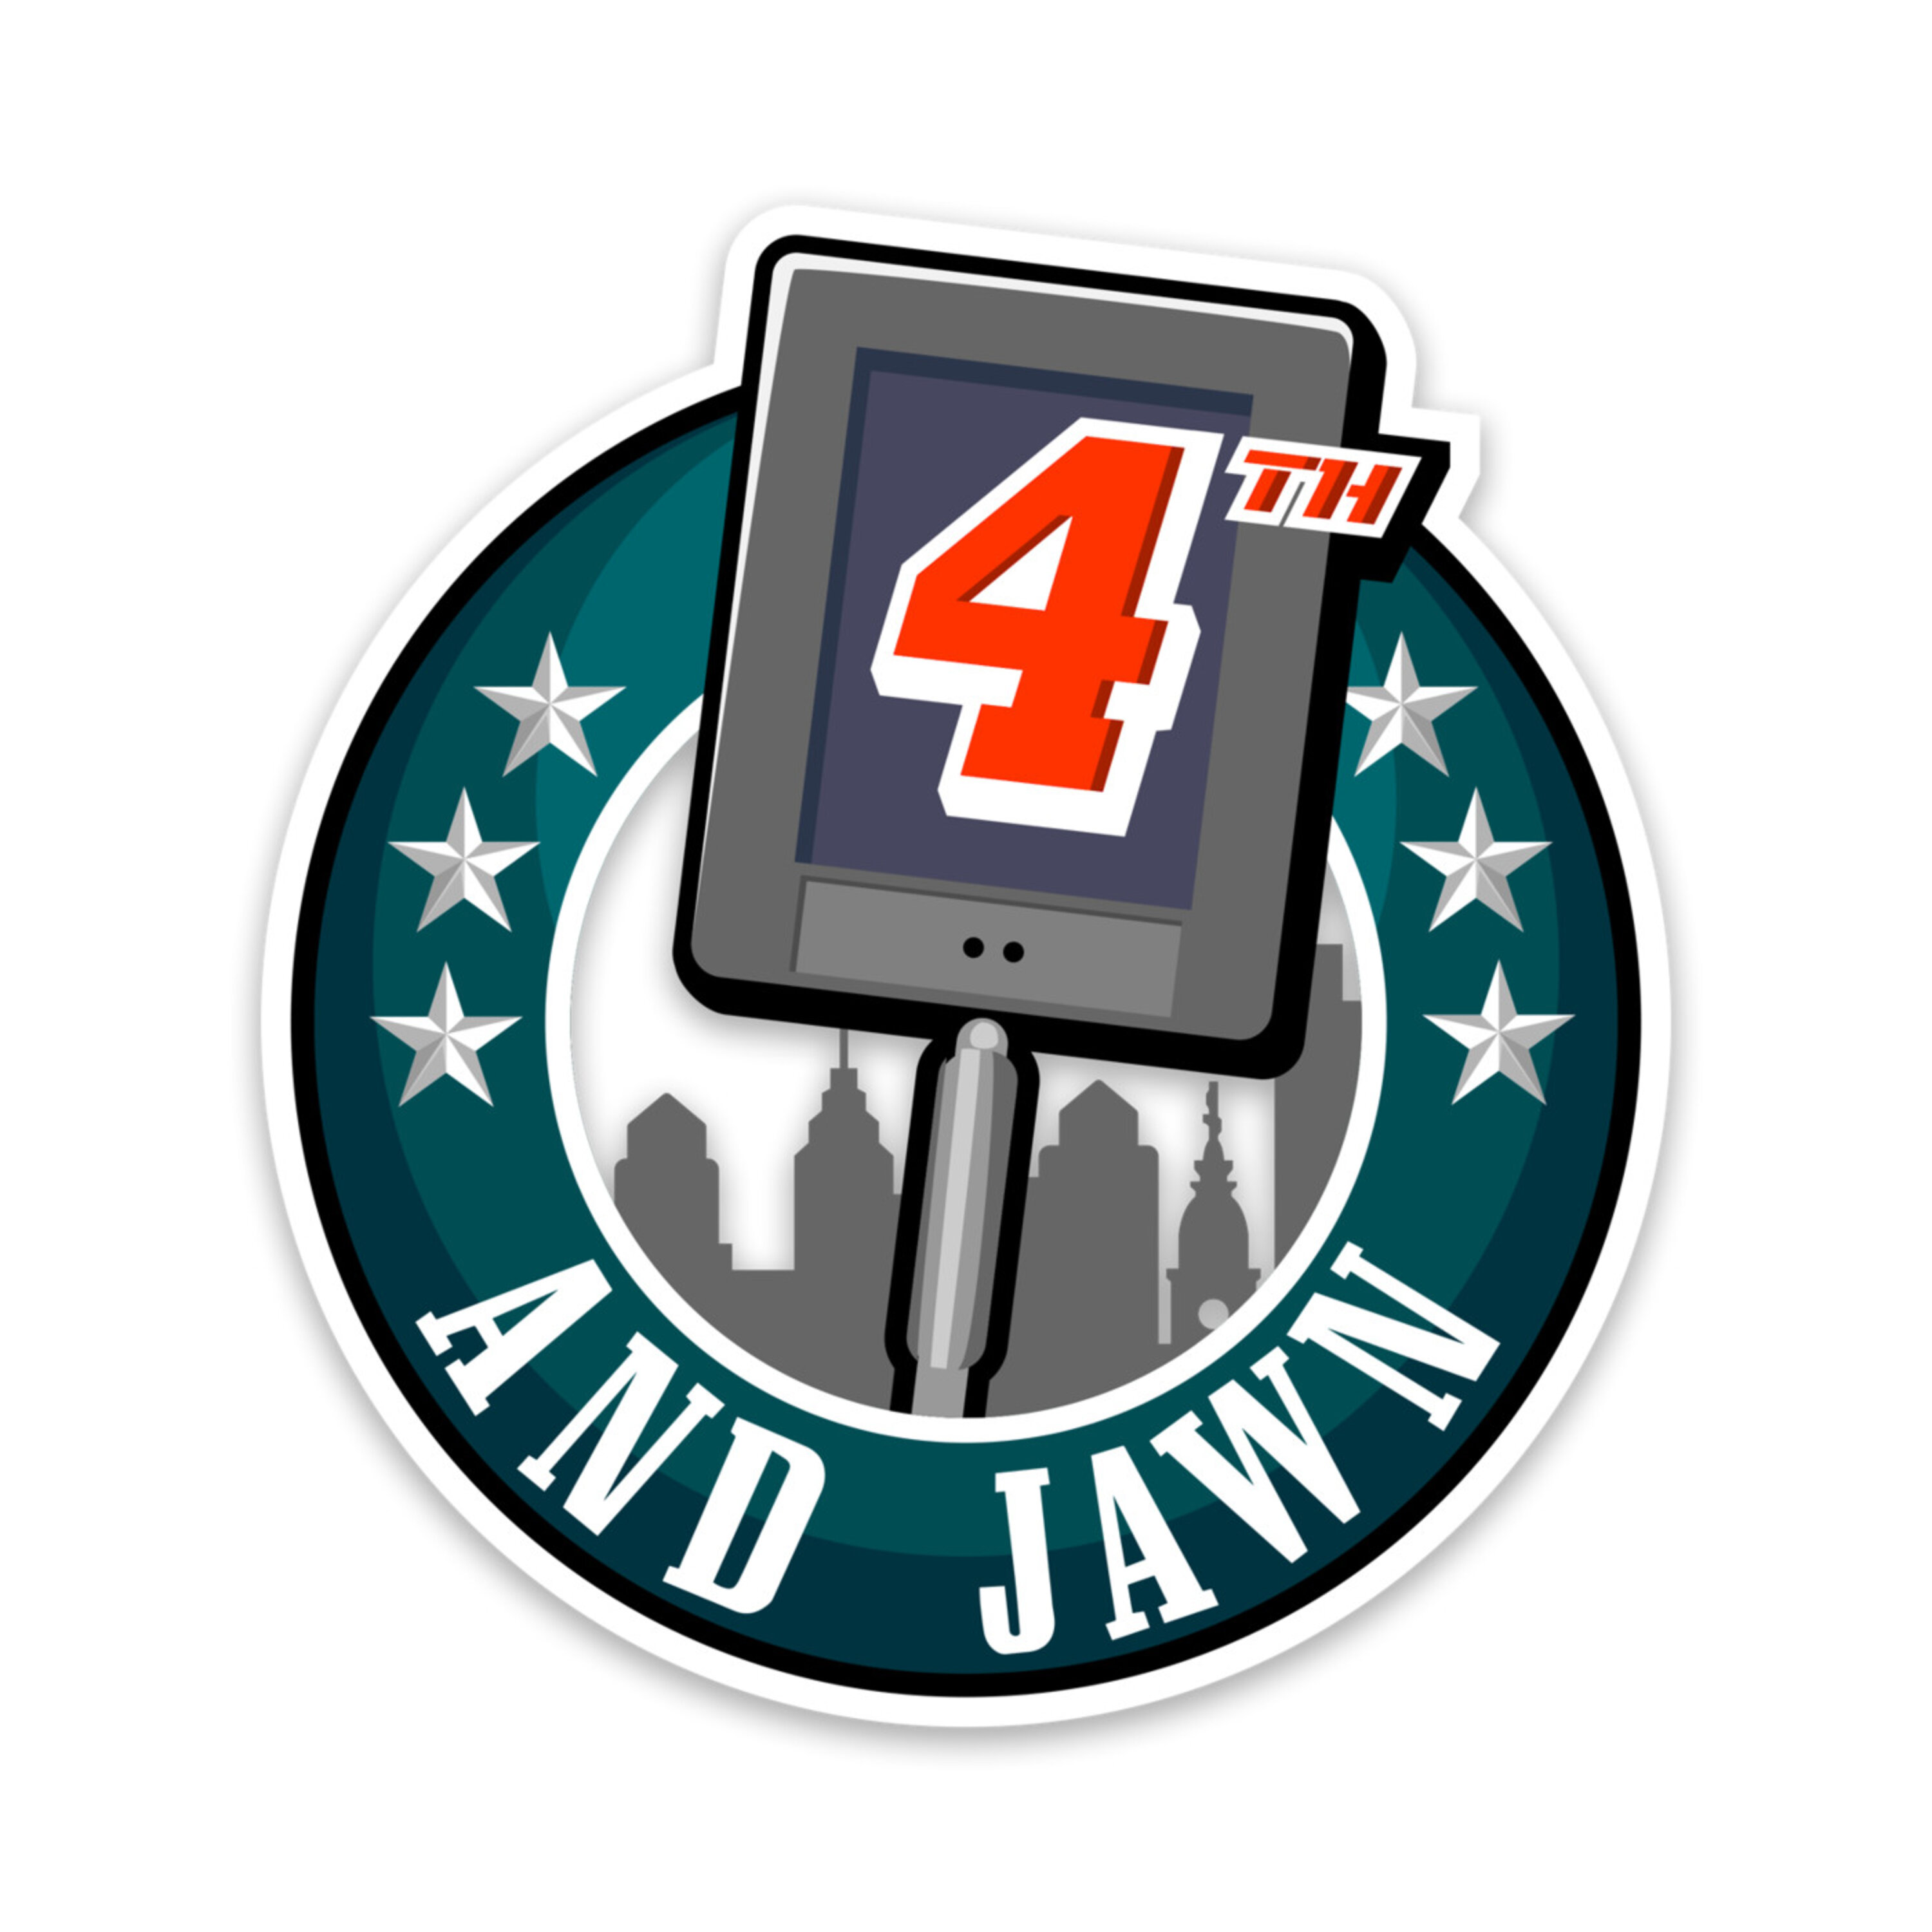 4th and Jawn - Episode 293 - Training Camp Superlatives